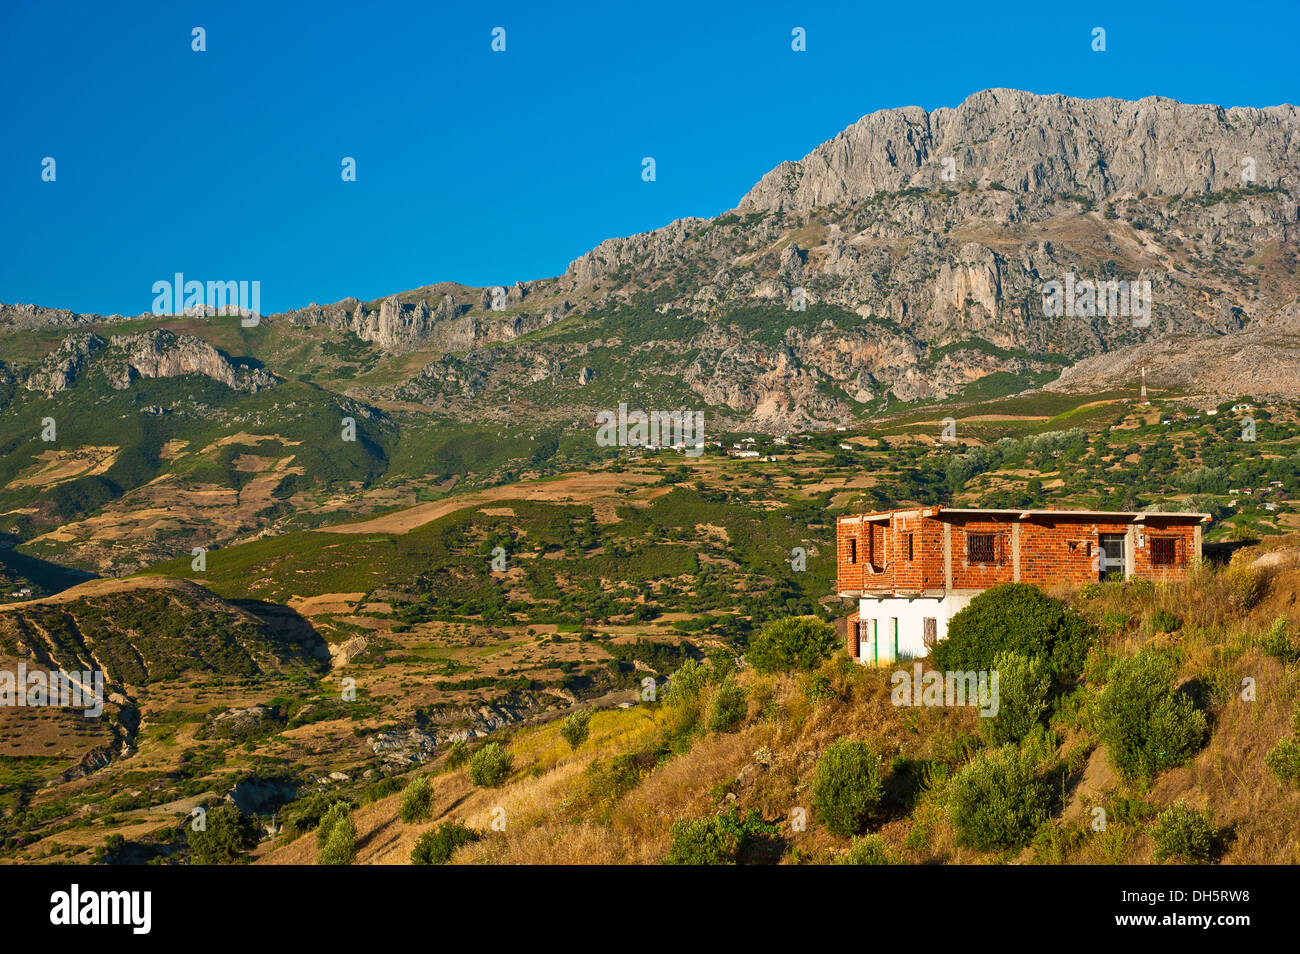 Typical mountain landscape with house, small fields and olive trees in the Rif or Riff Mountains, northern Morocco, Morocco Stock Photo